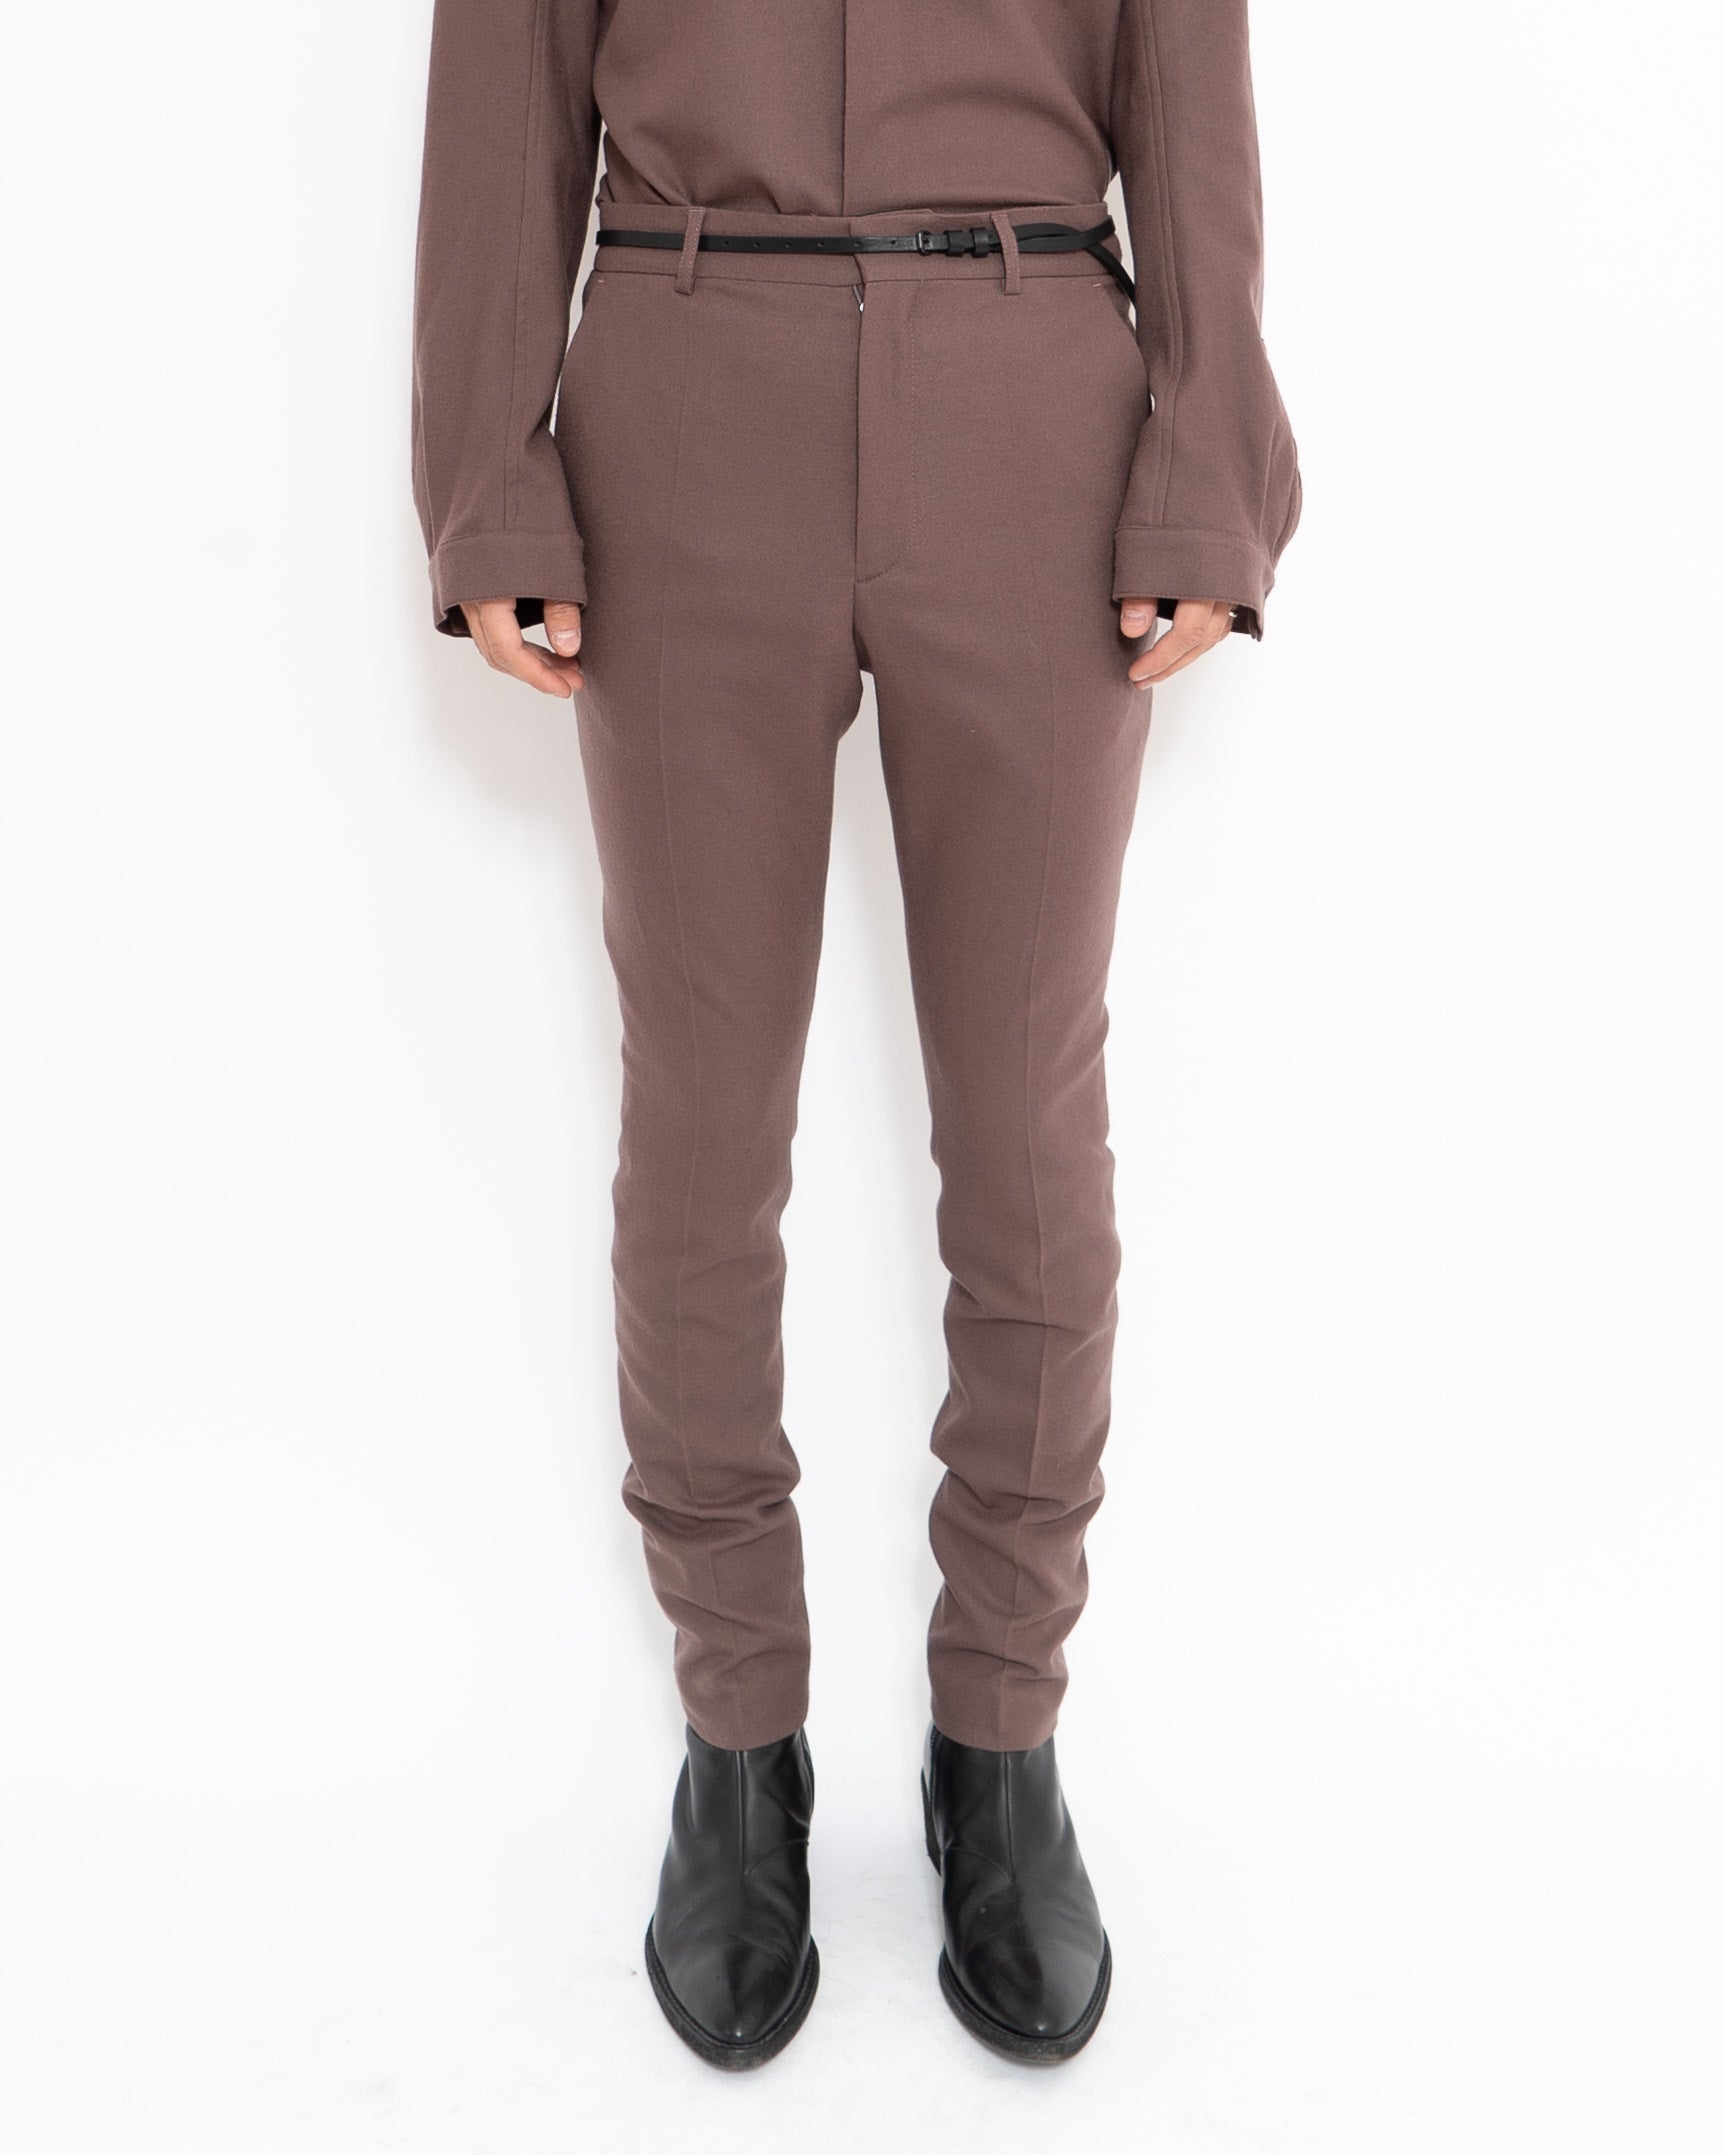 FW14 Calabria Dusty Rose Wool Trousers Sample